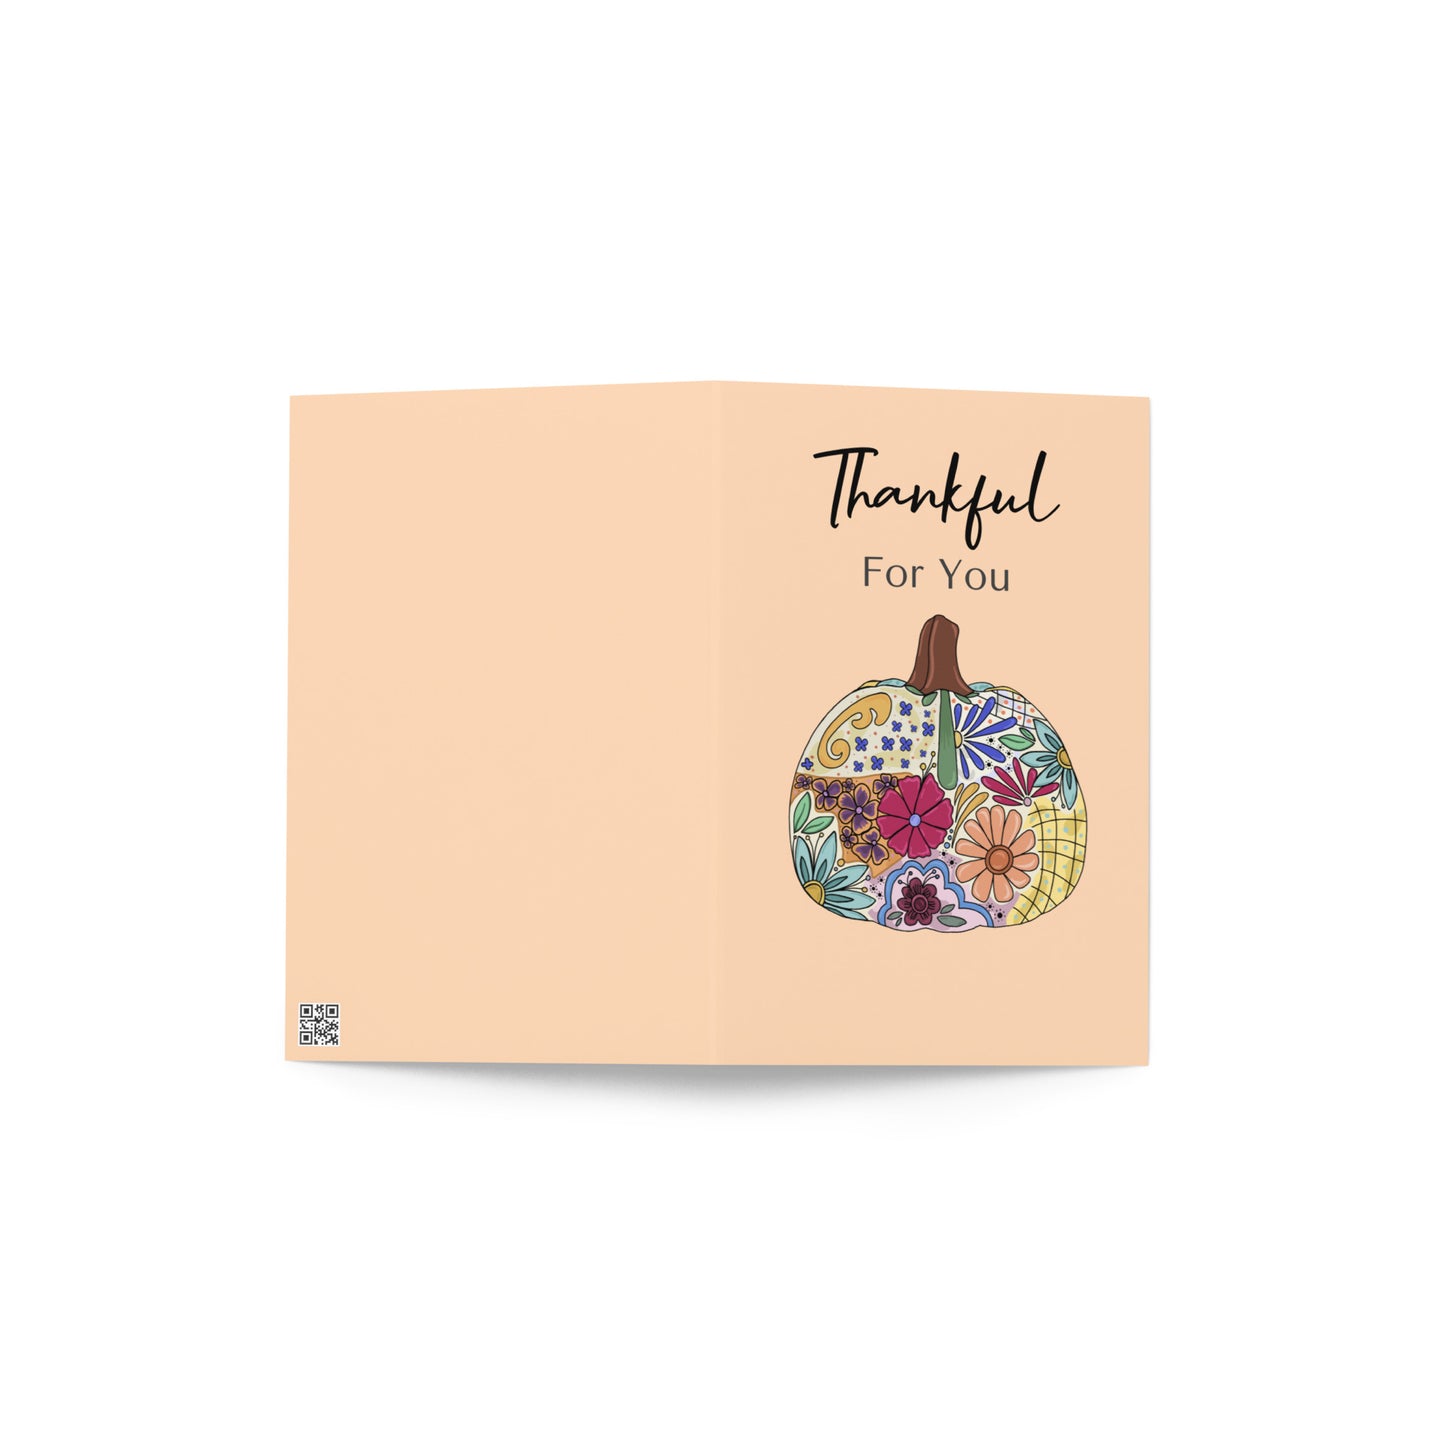 Thankful For You Greeting card